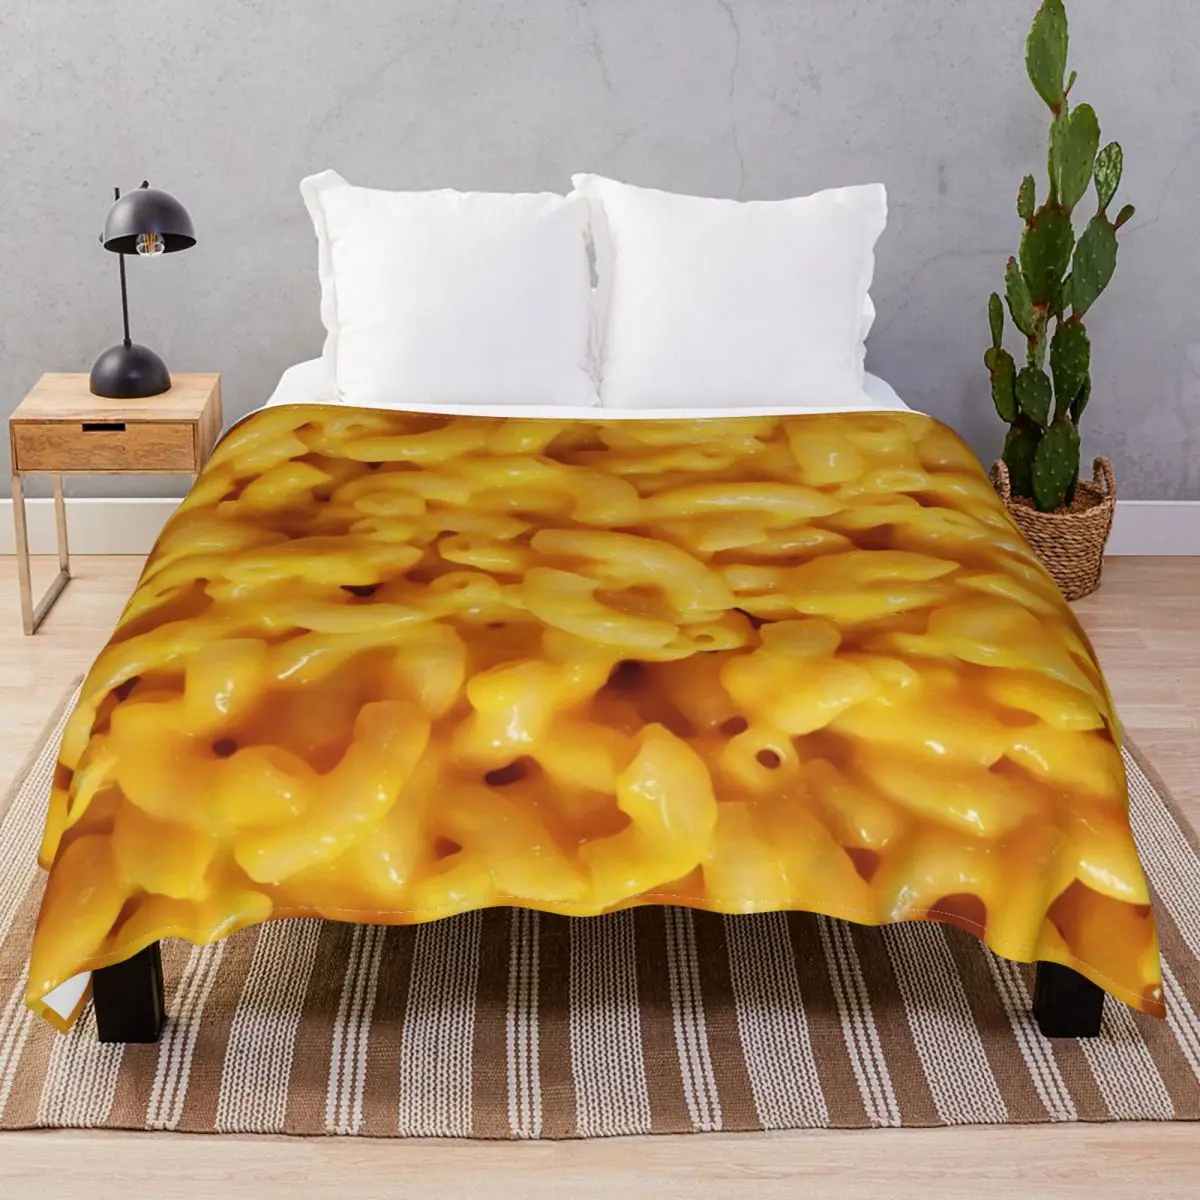 Mac N' Cheesey Blankets Flannel Textile Decor Fluffy Unisex Throw Blanket for Bedding Home Couch Travel Cinema